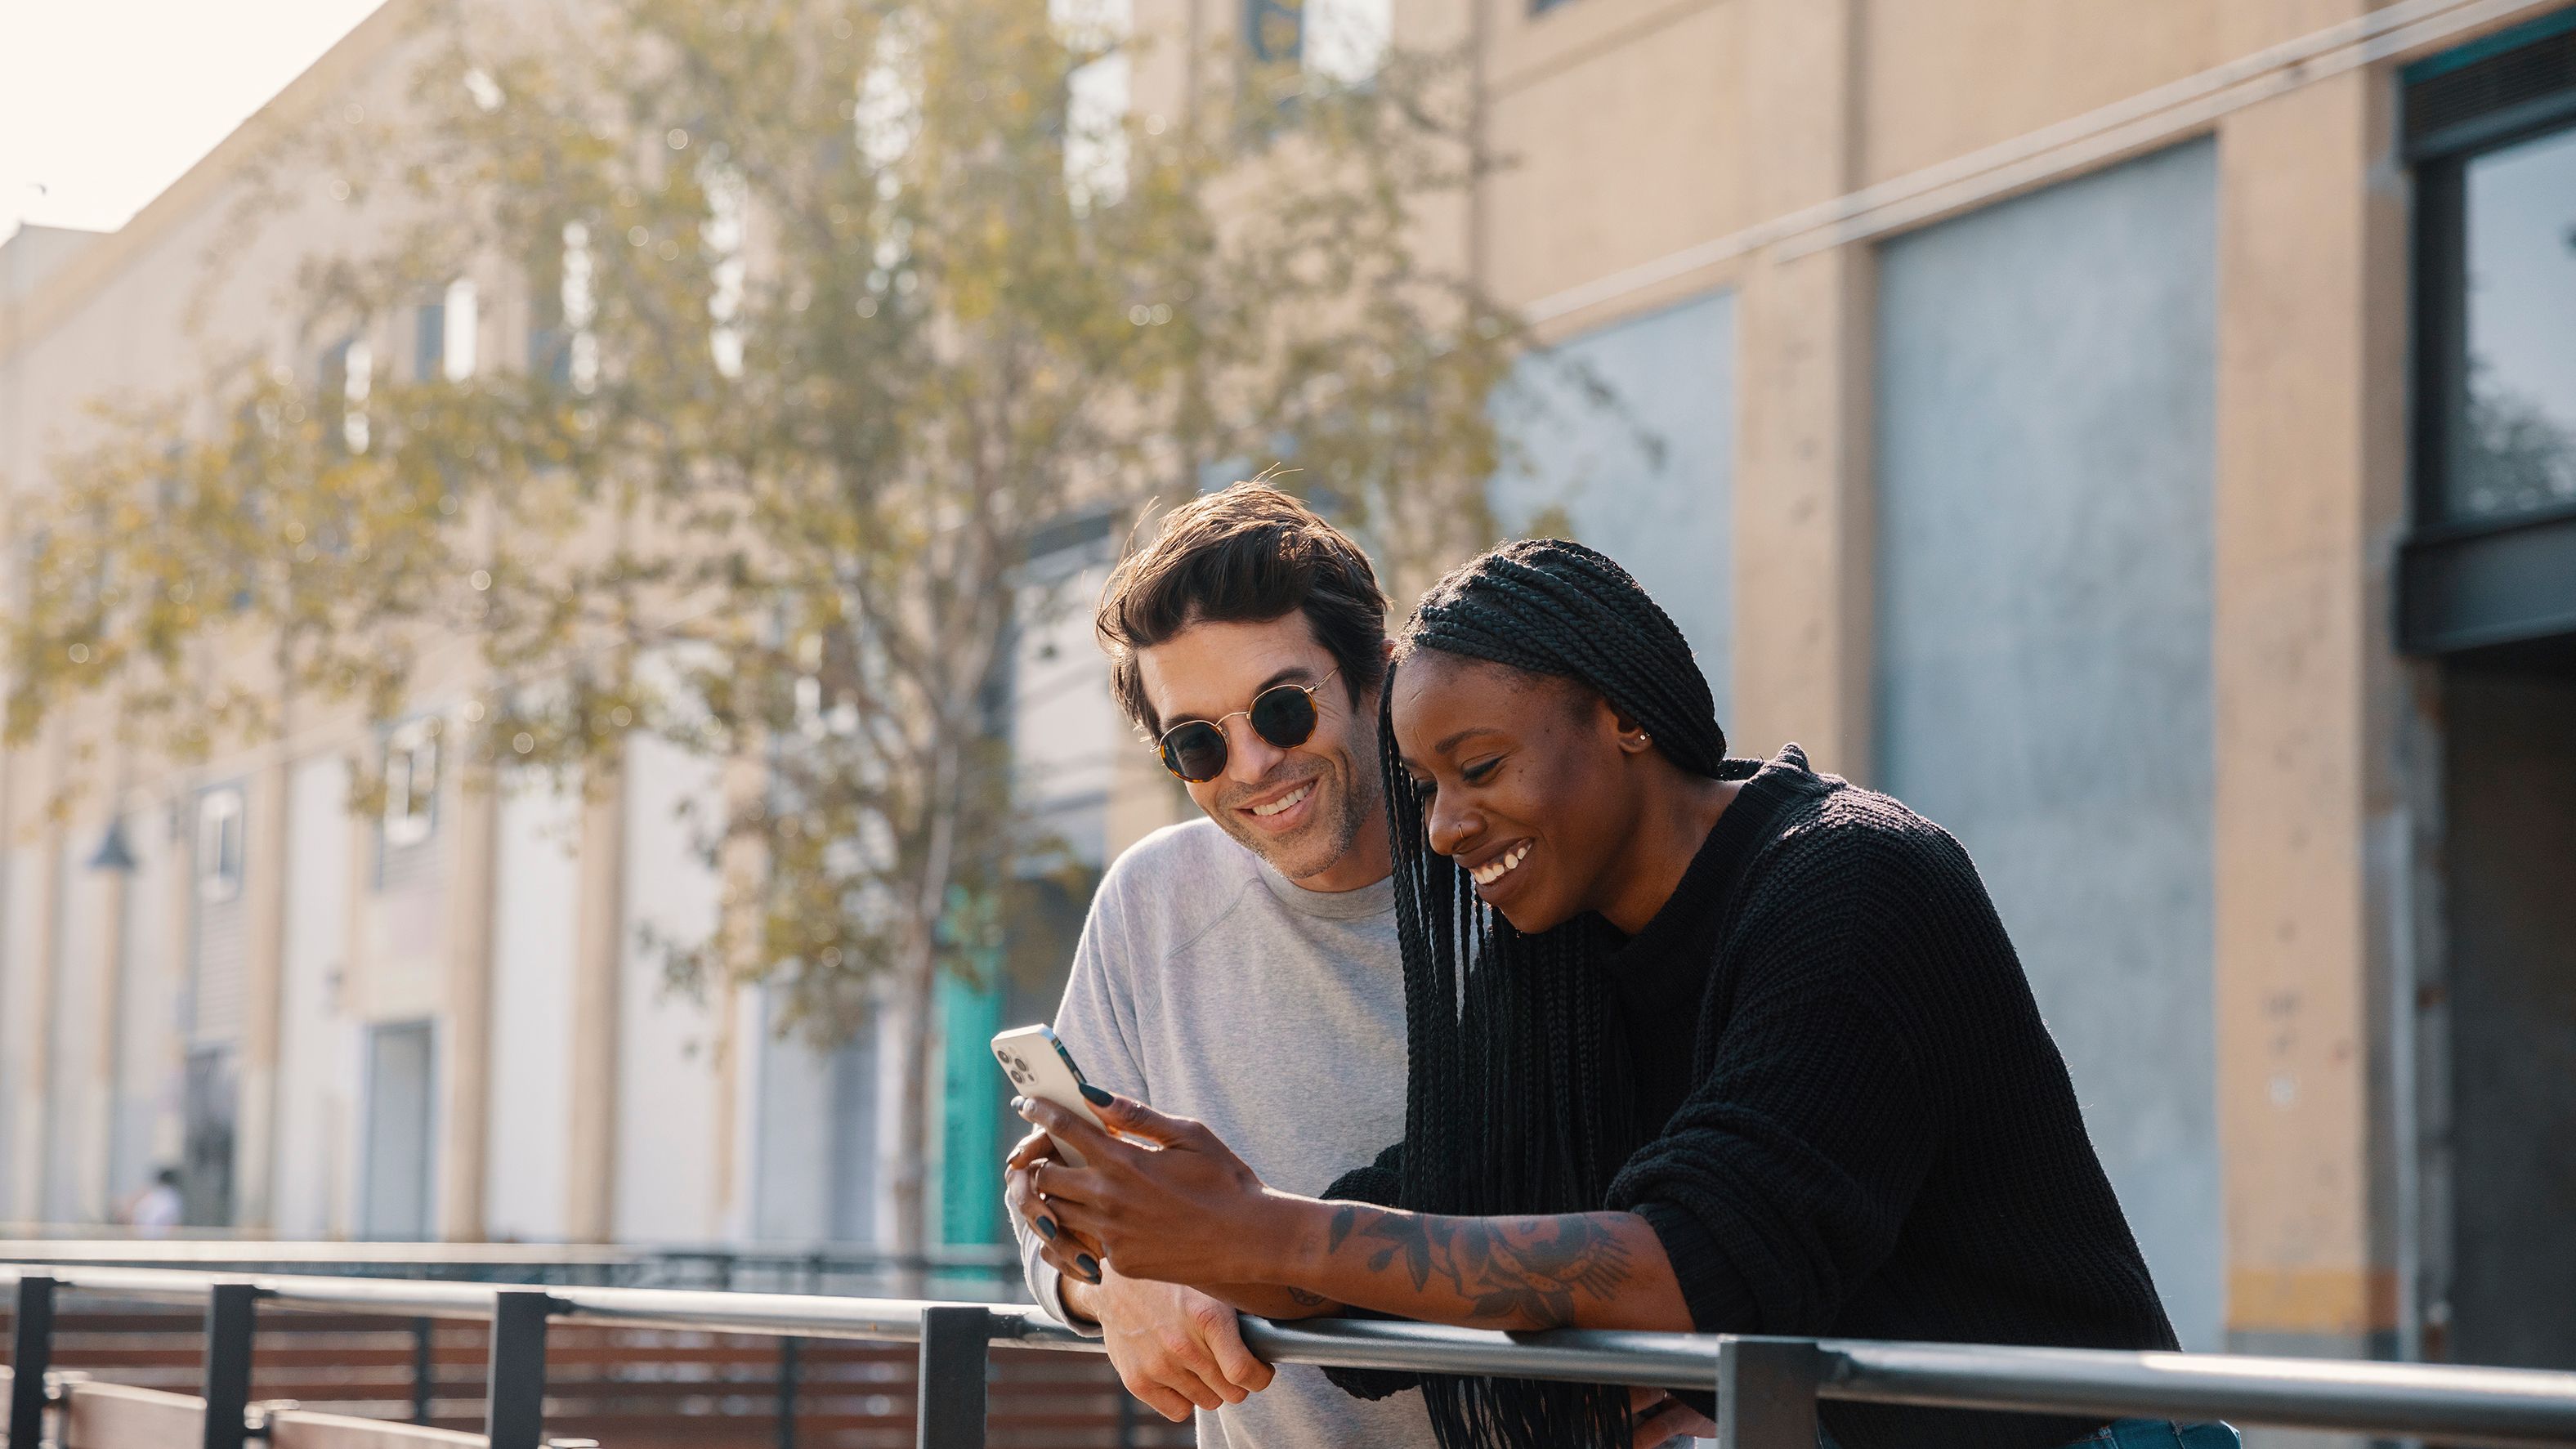 Two people smiling and leaning over a metal barrier while looking at one of their mobile devices.